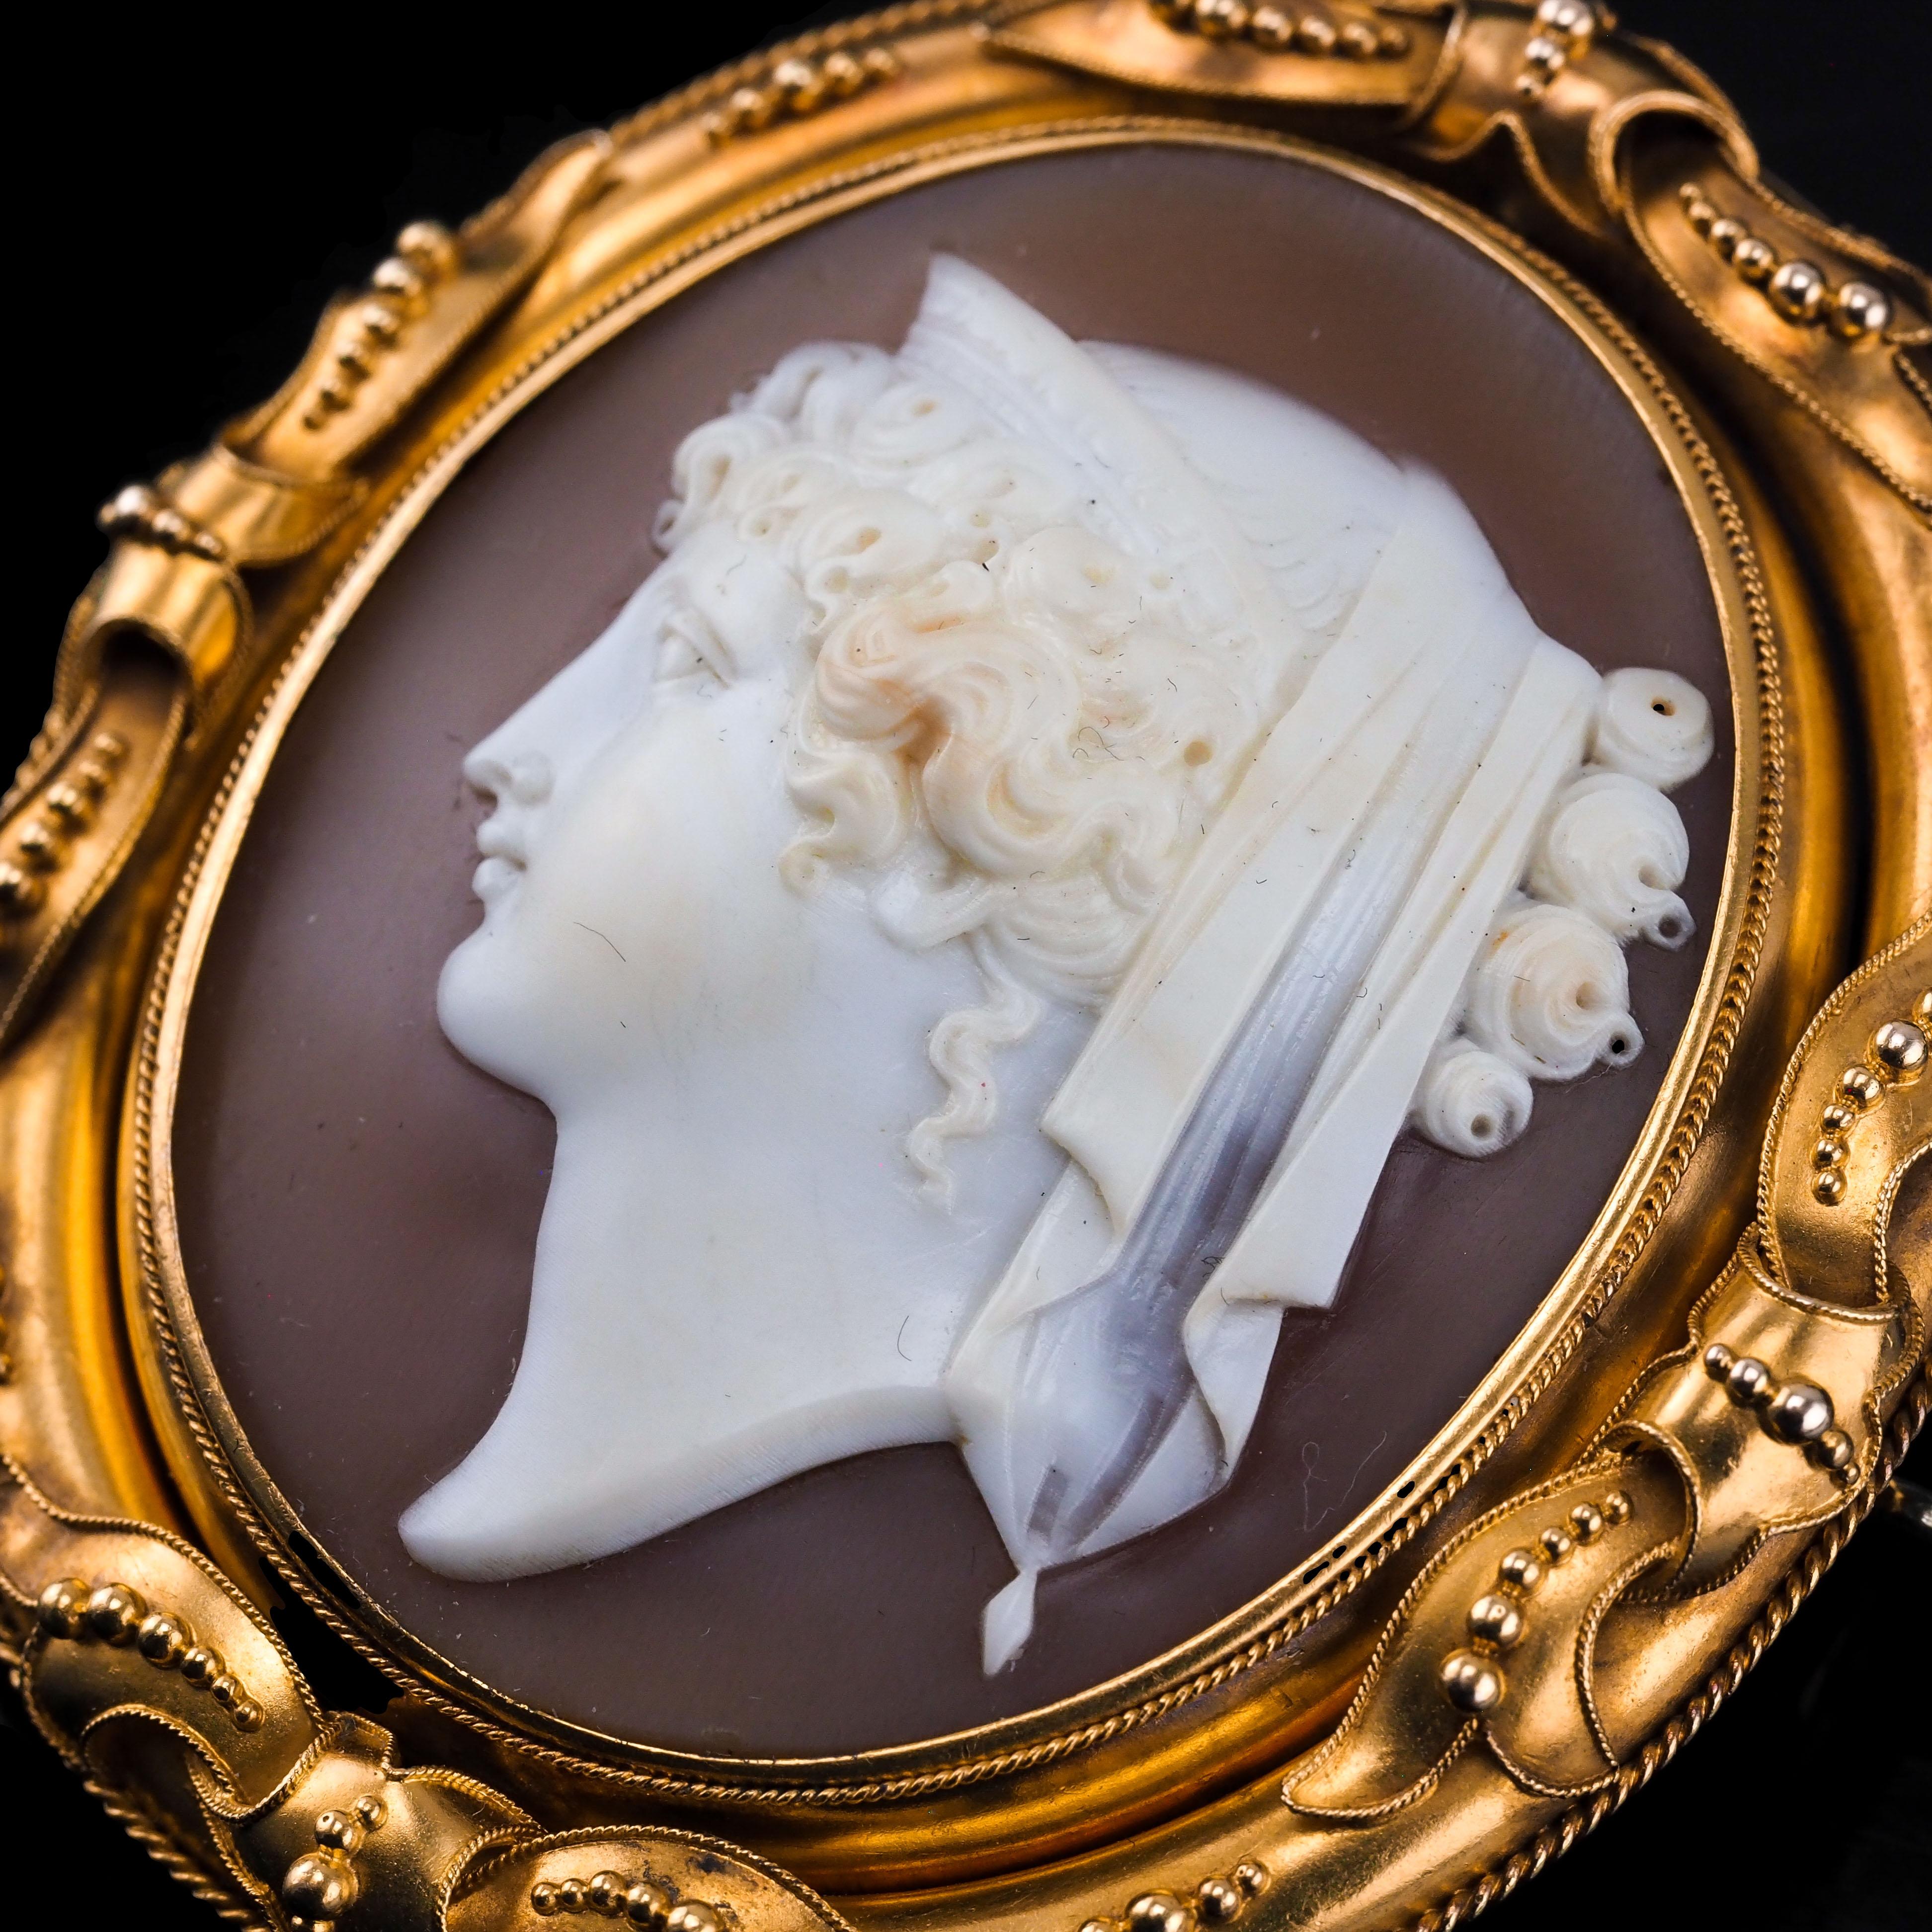 Antique Cameo Brooch Pendant Necklace 18K Gold - Victorian c.1860 For Sale 9